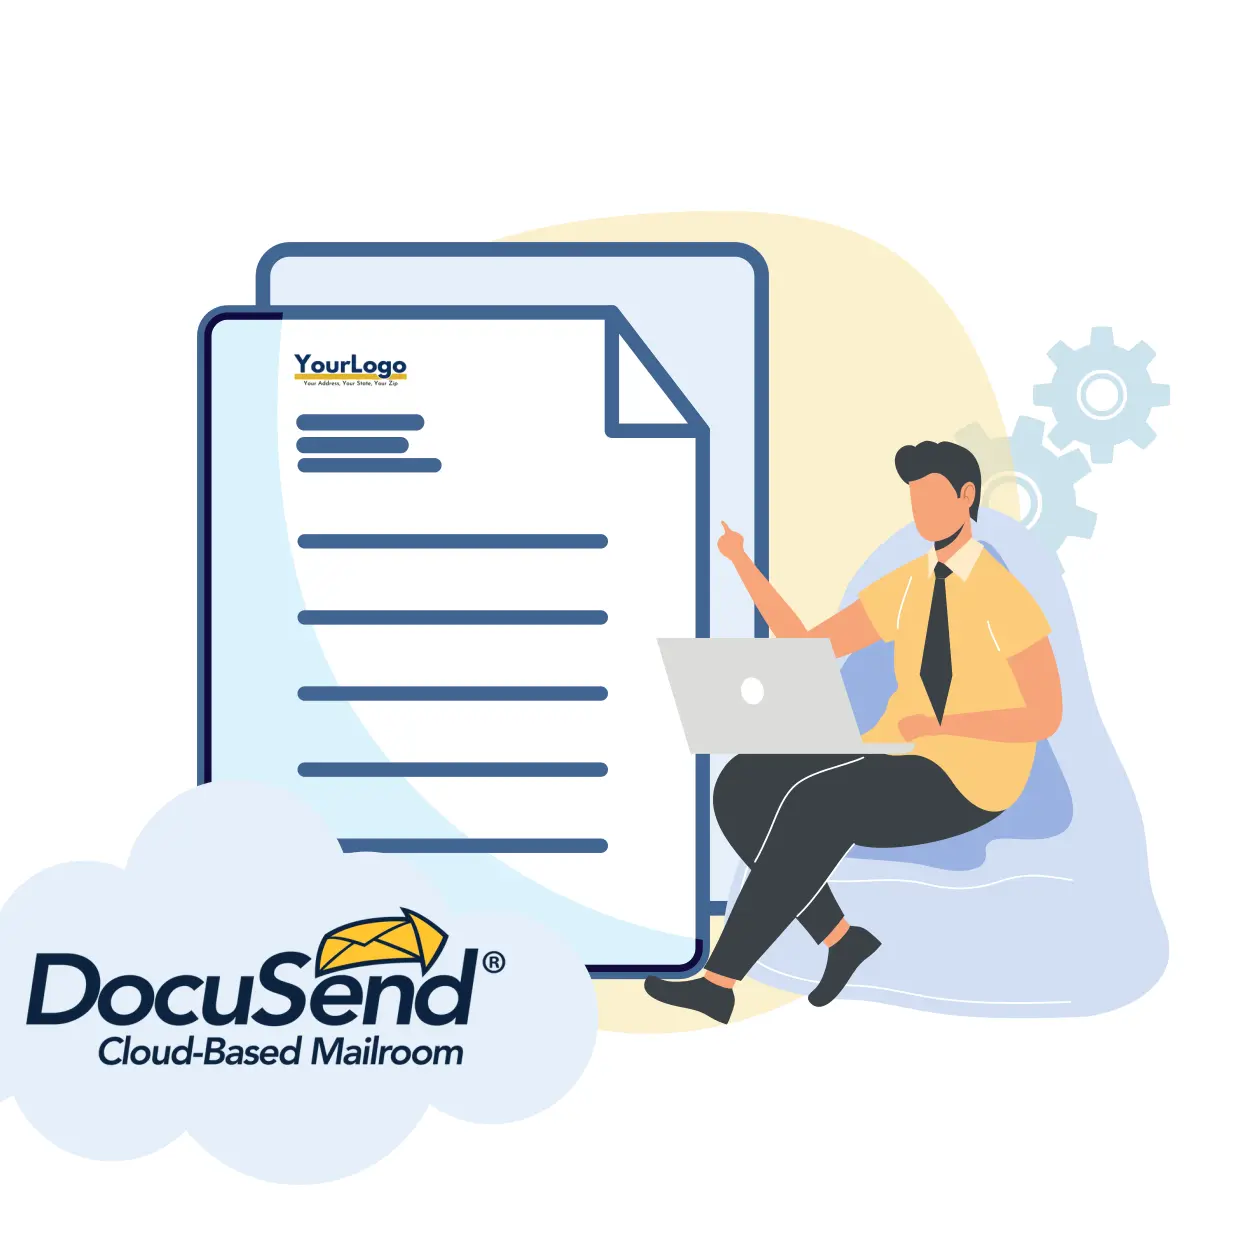 Email a document and automatically send it by US postal mail